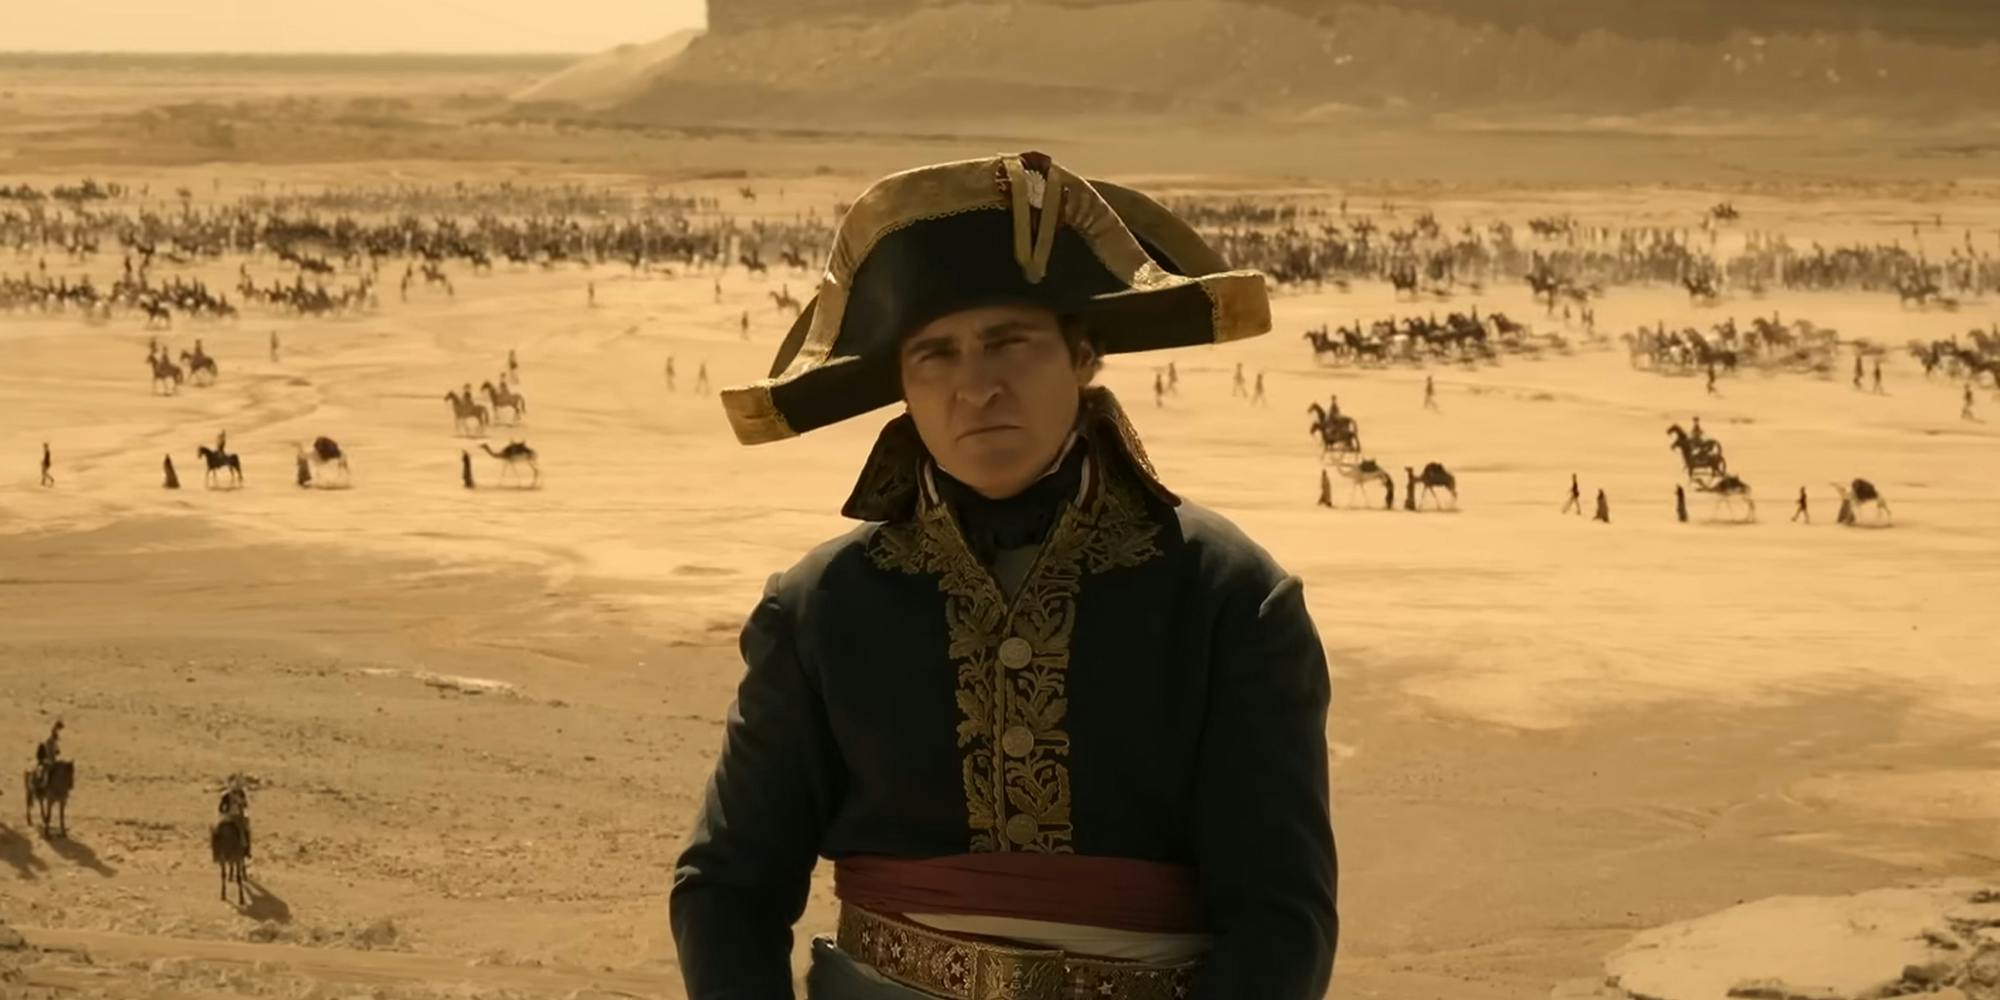 'Napoleon' trailer led some to fear atrocities will be glossed over